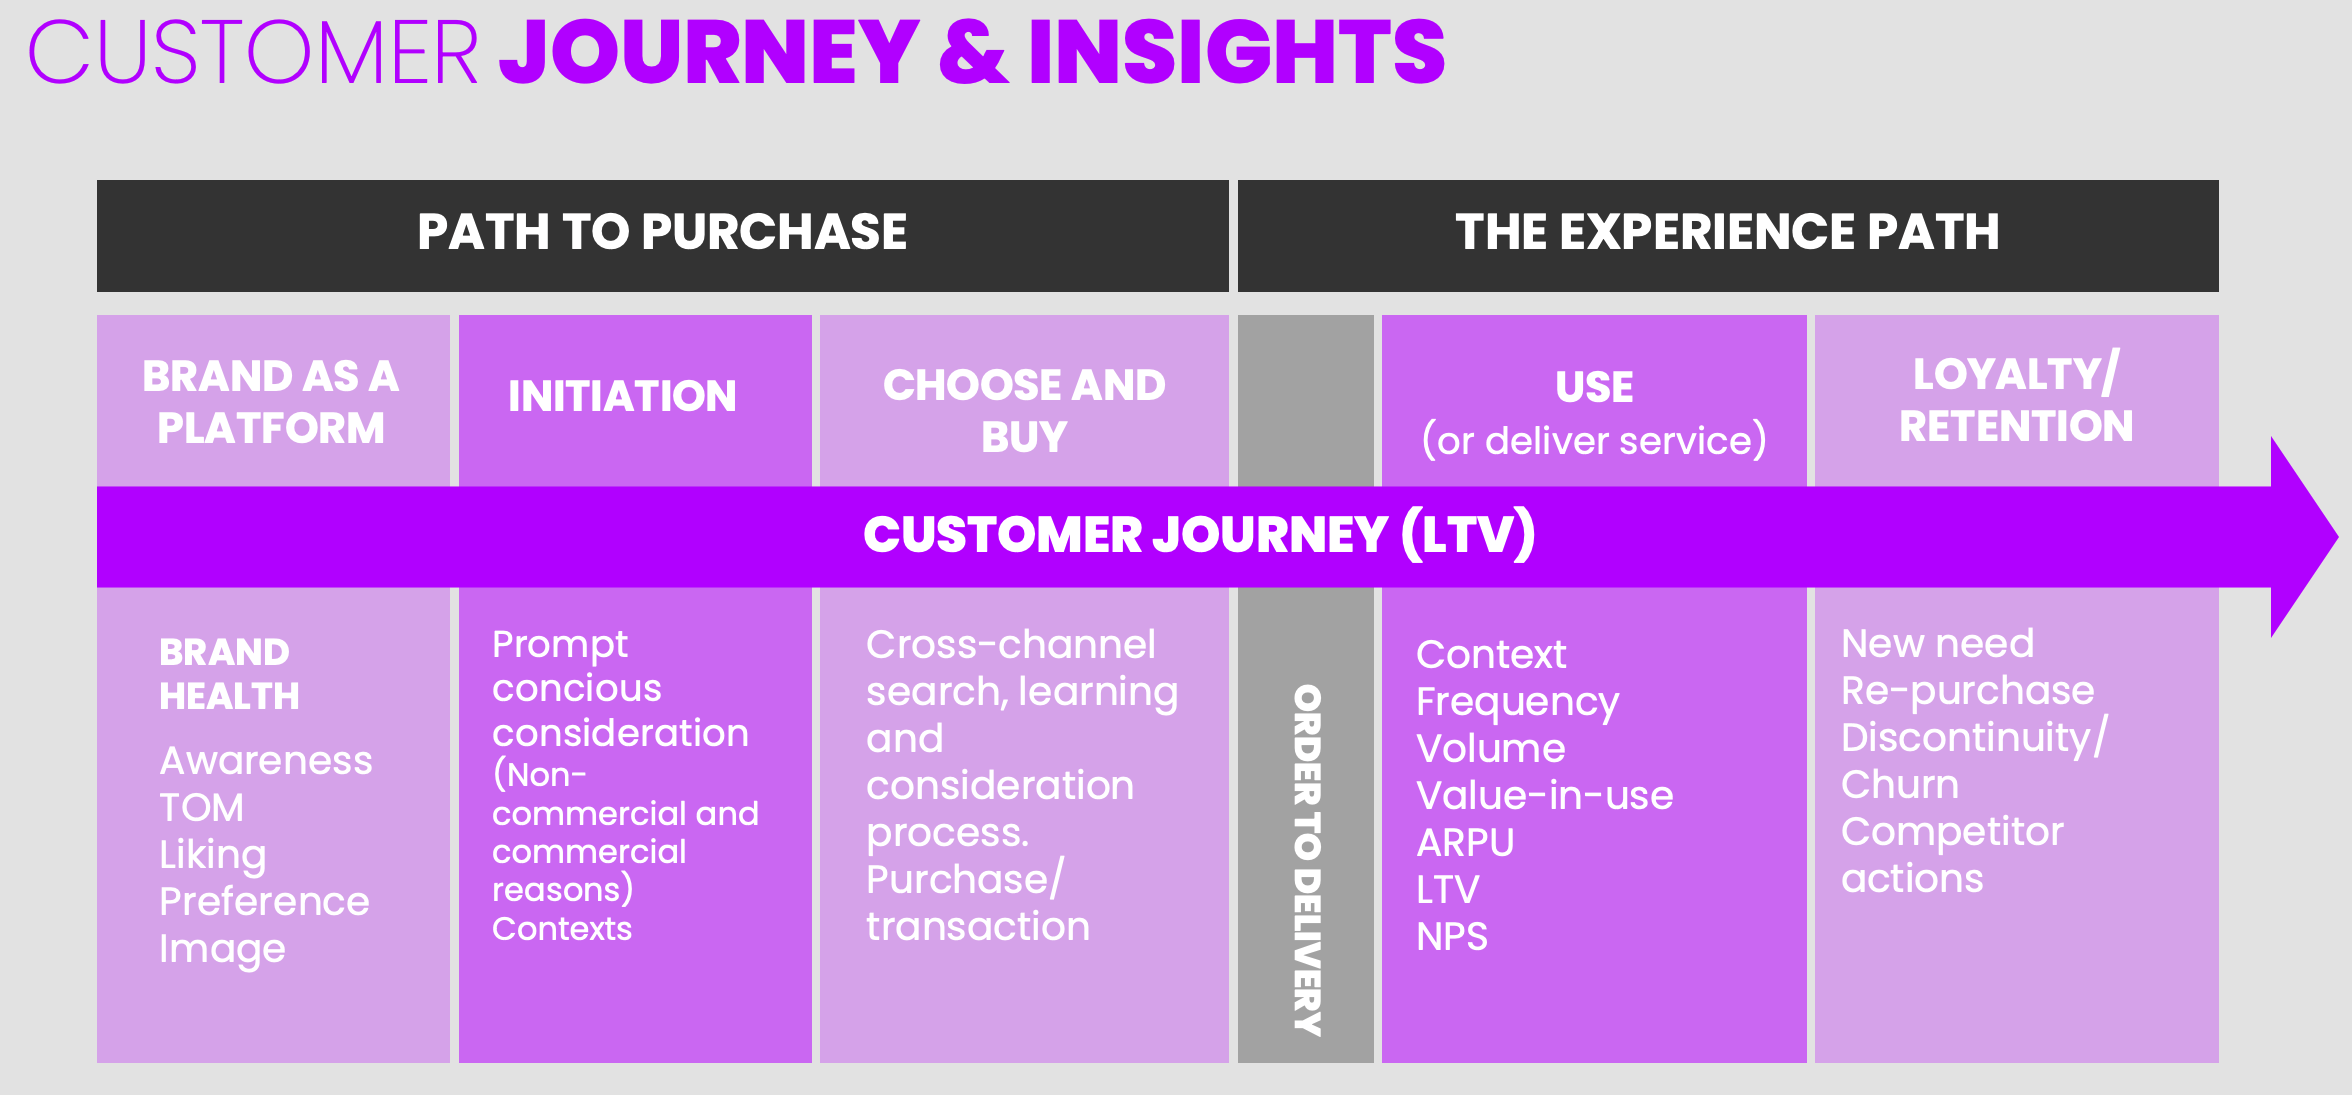 From path to purchase to the experience path, value growth and loyalty/retention maximizing LTV and ARPA